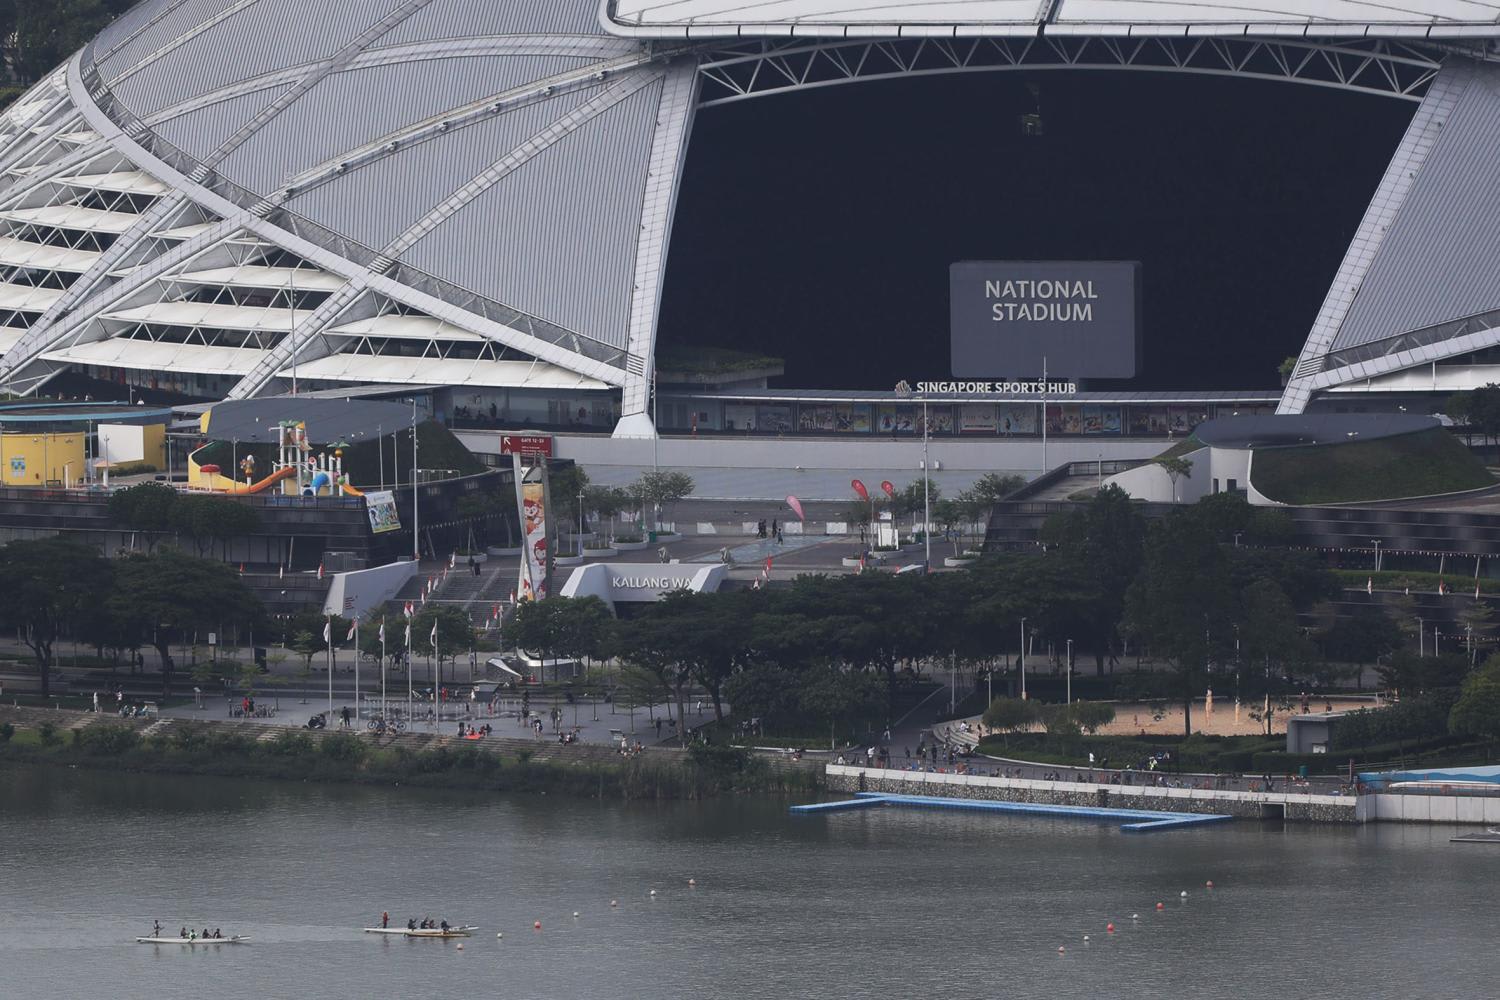 A view of the National Stadium within the Singapore Sports Hub.